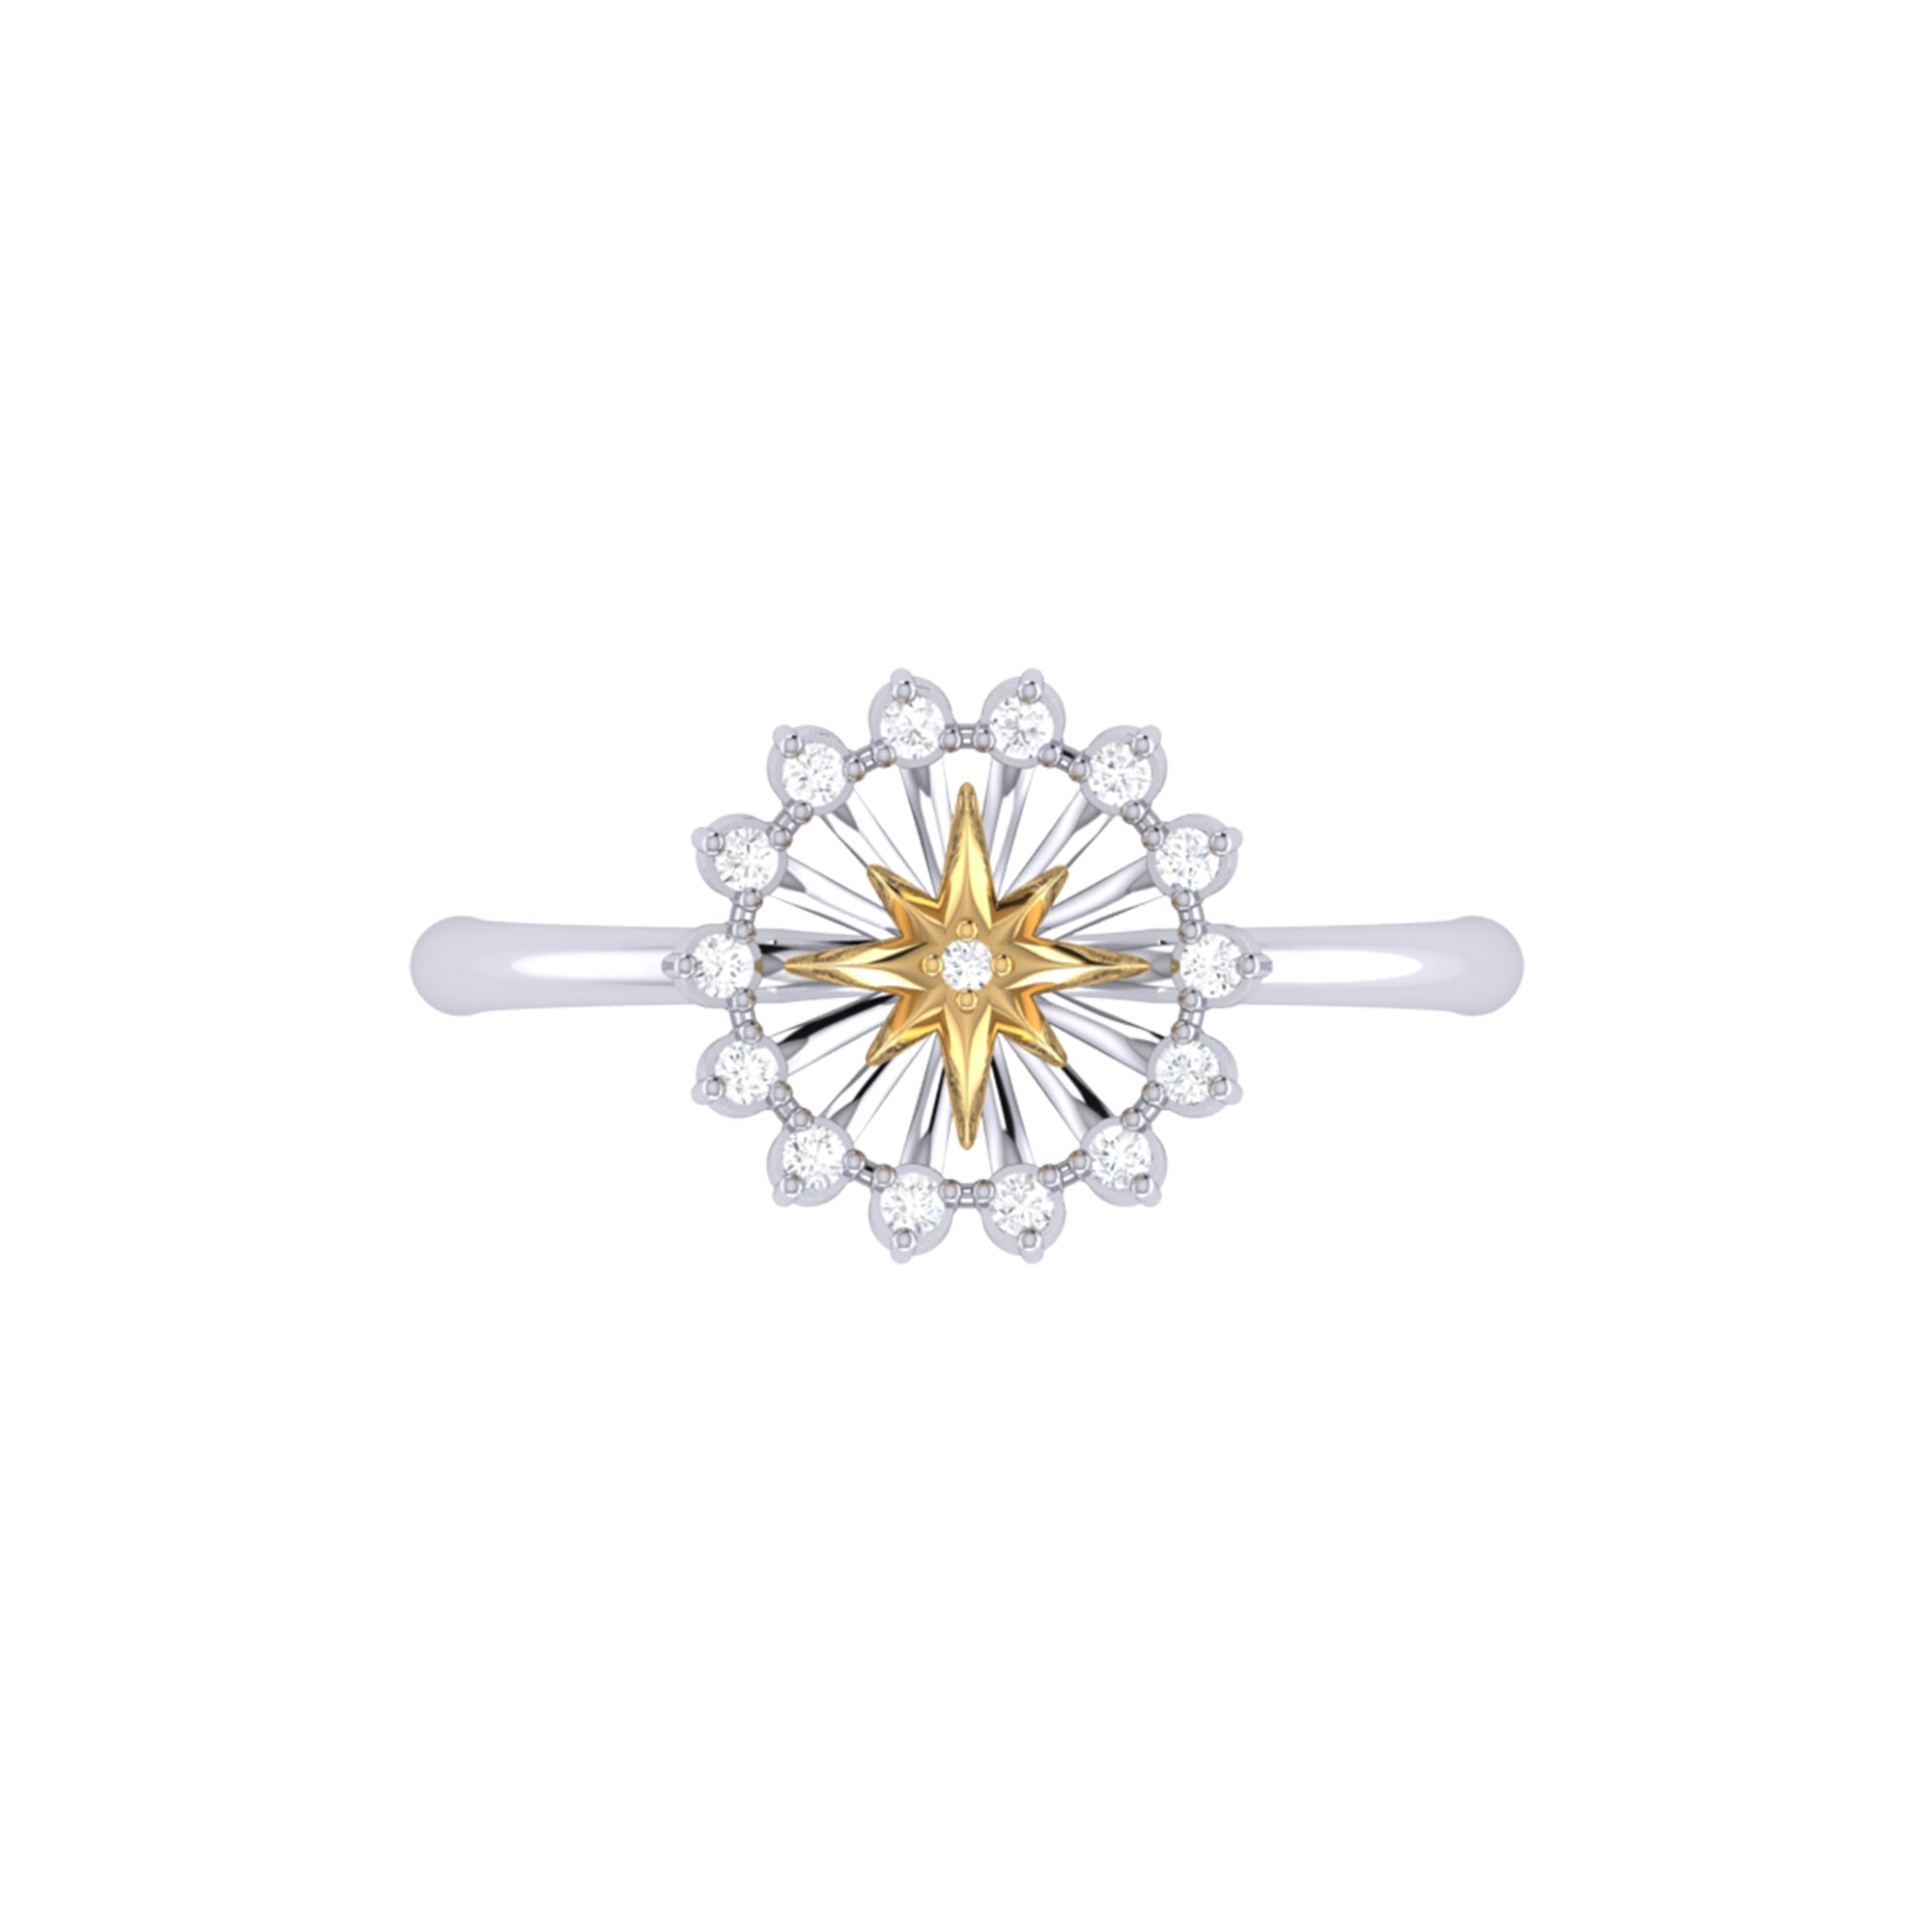 Starburst Two-Tone Diamond Ring in 14K Yellow Gold Vermeil on Sterling ...